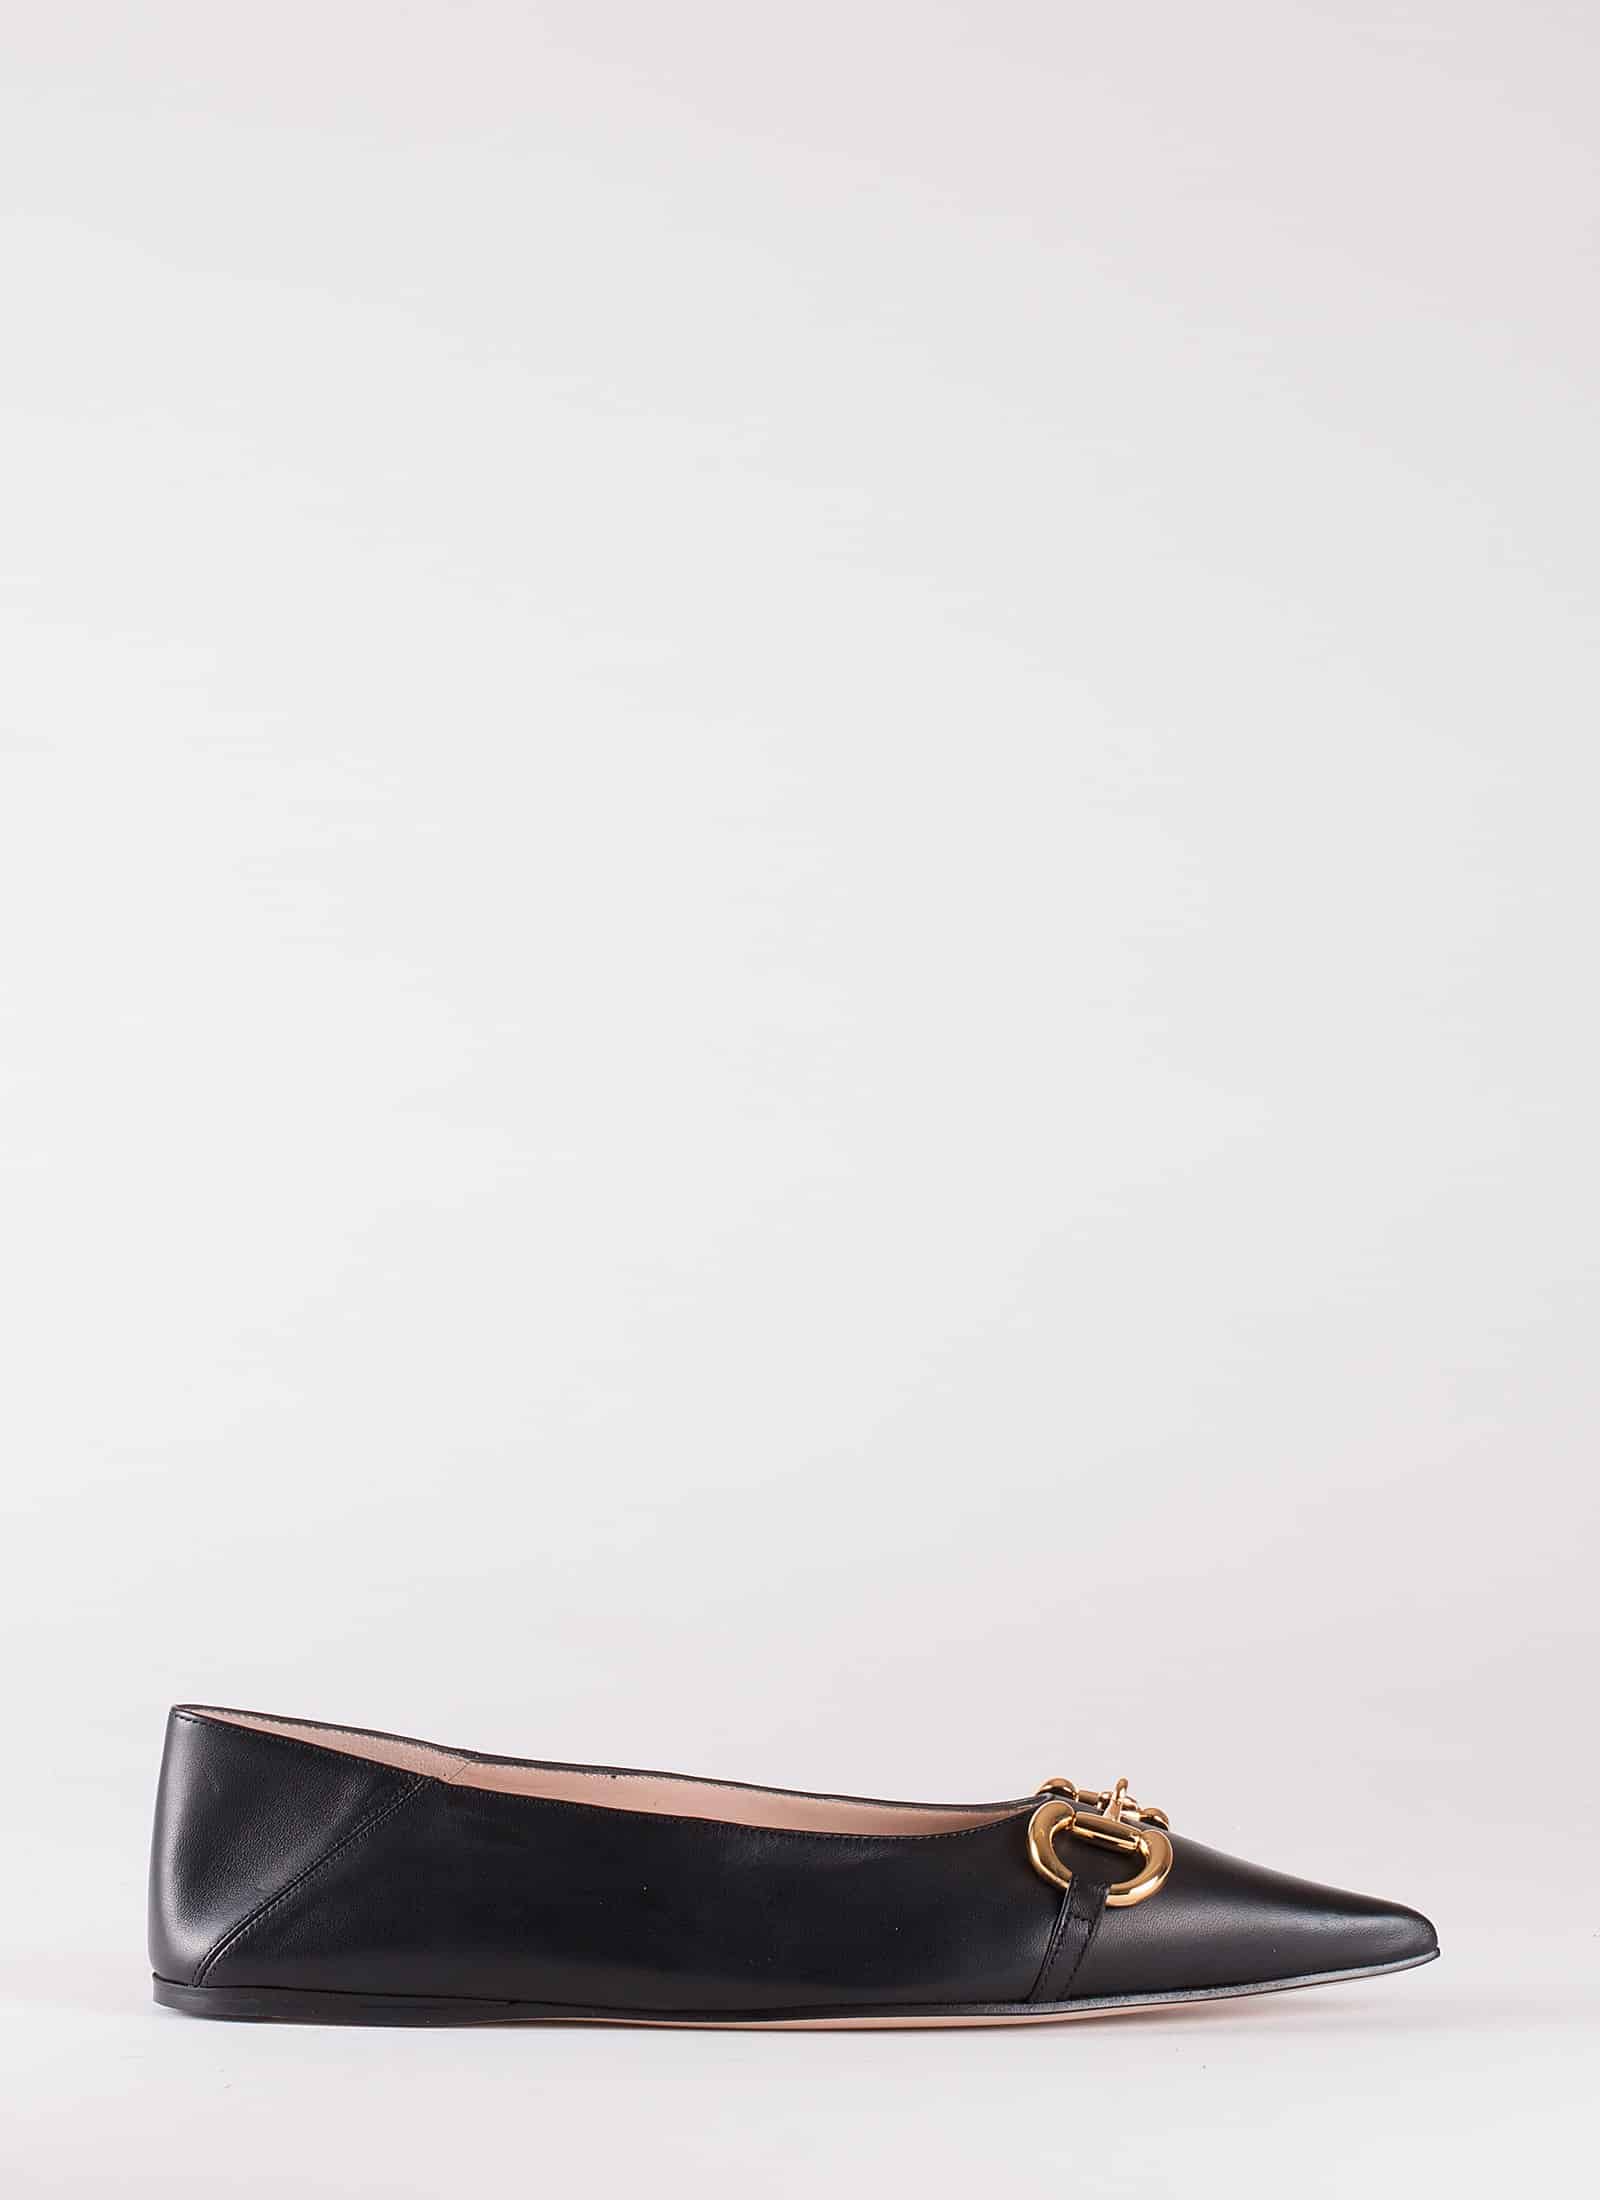 LEATHER SHOES - GUCCI